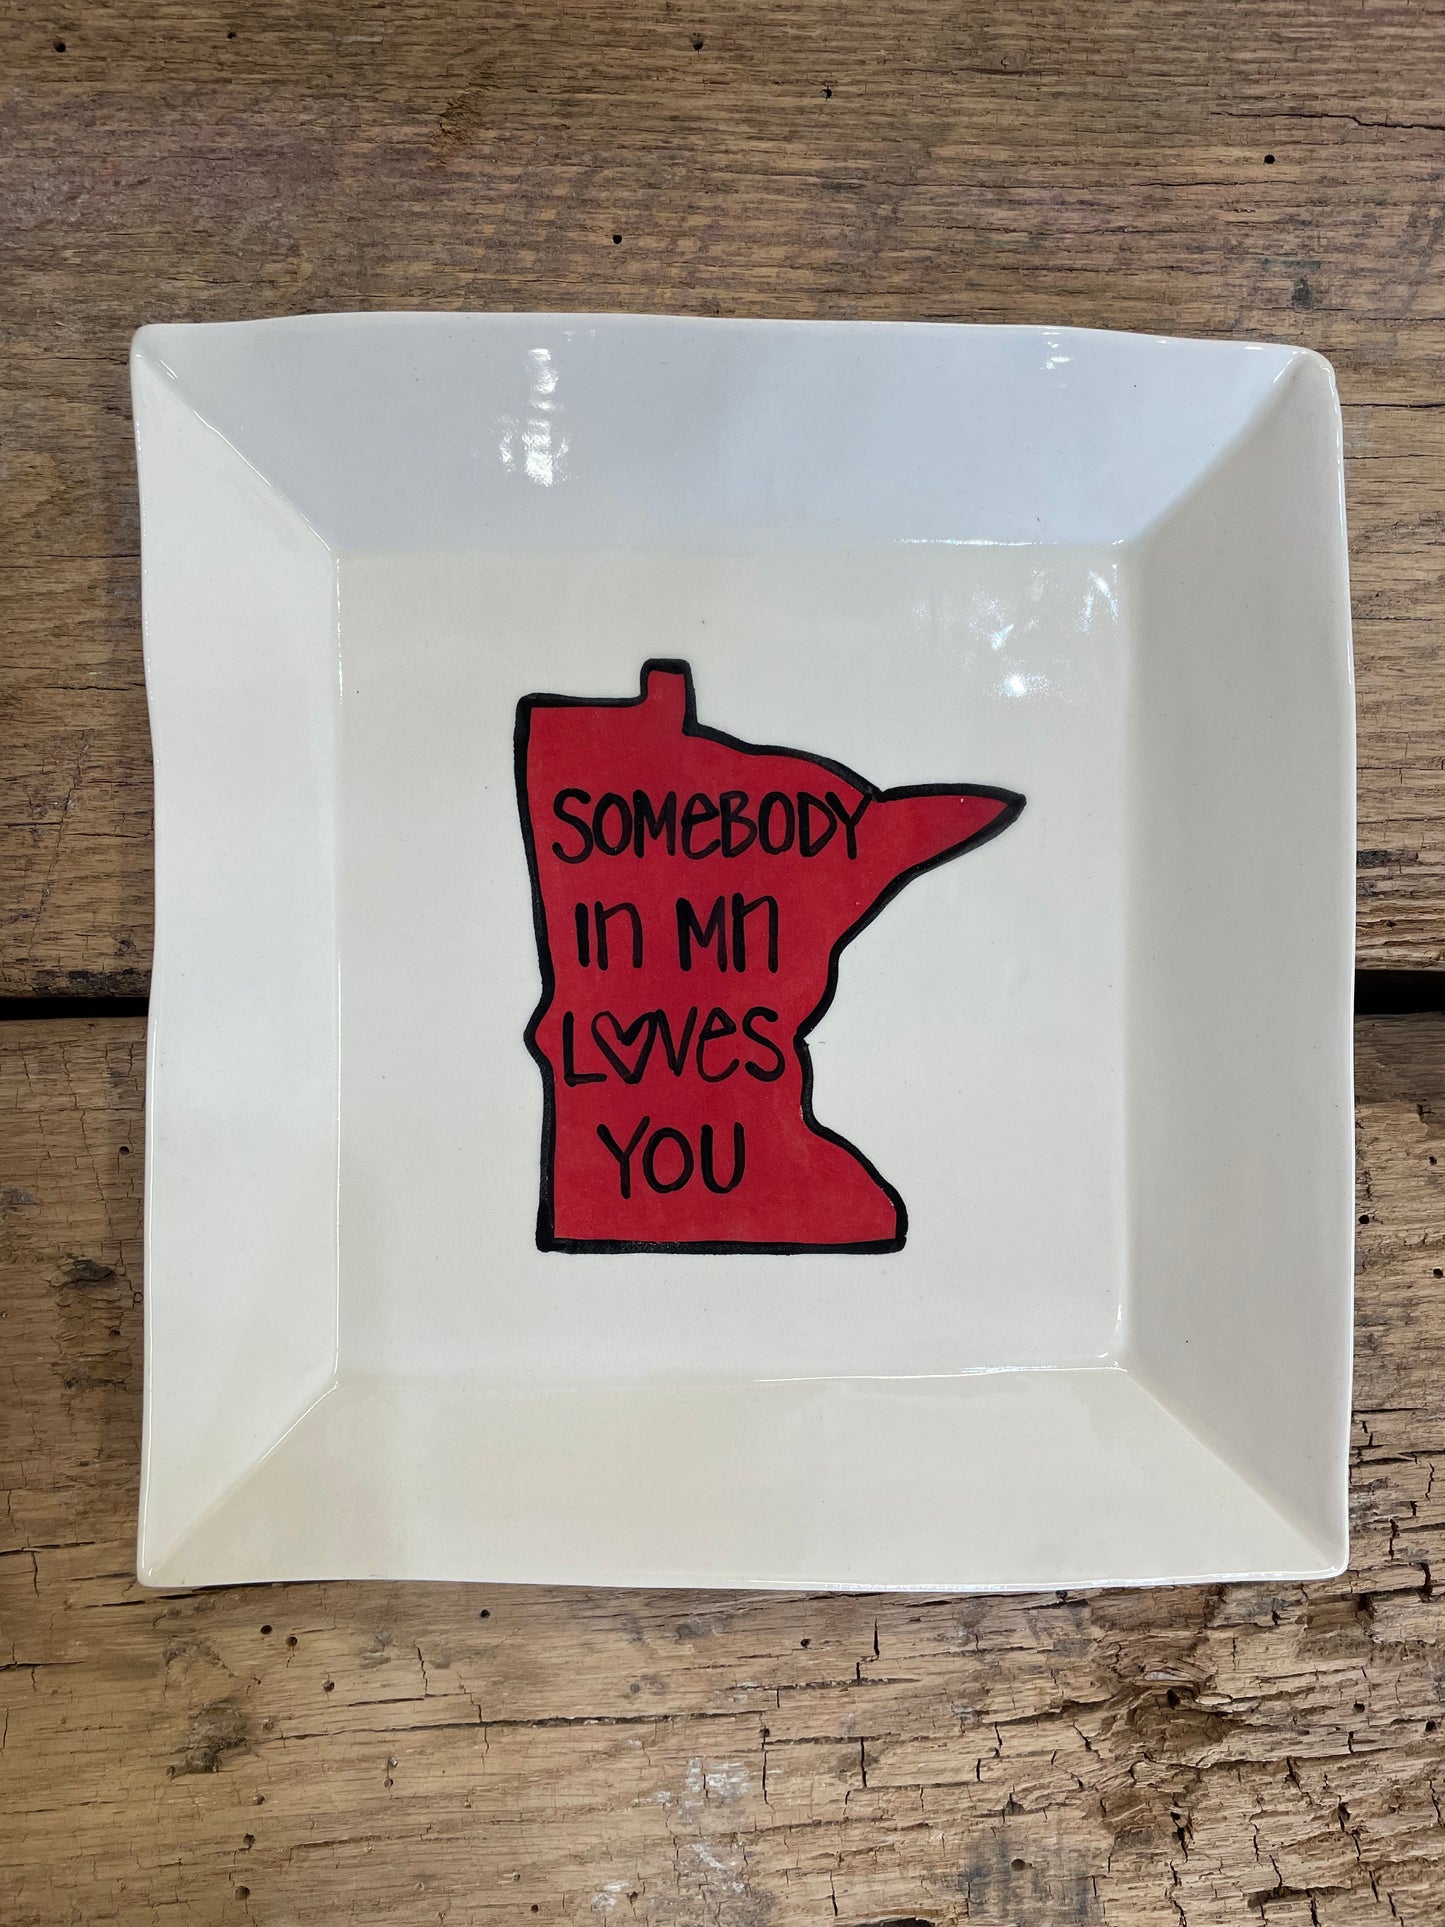 MN Square Lifted Plate - "Somebody in MN Loves You"